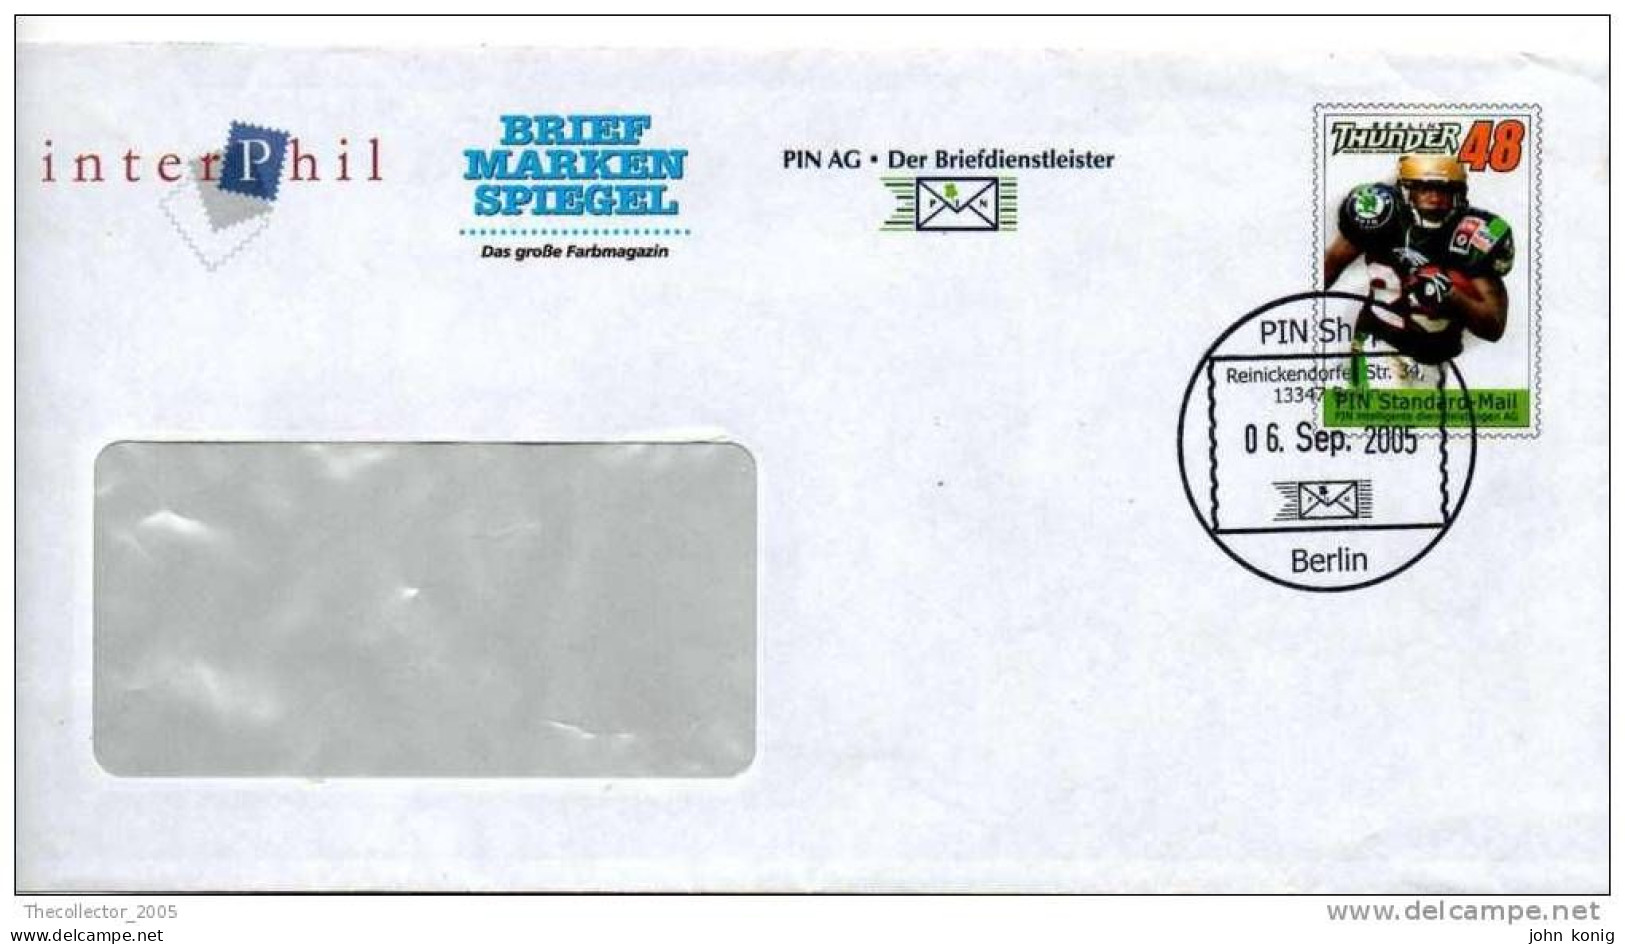 Busta Primo Giorno - FDC - First Day Cover - Germania - Germany - Football Americano - American Football - 2001-2010